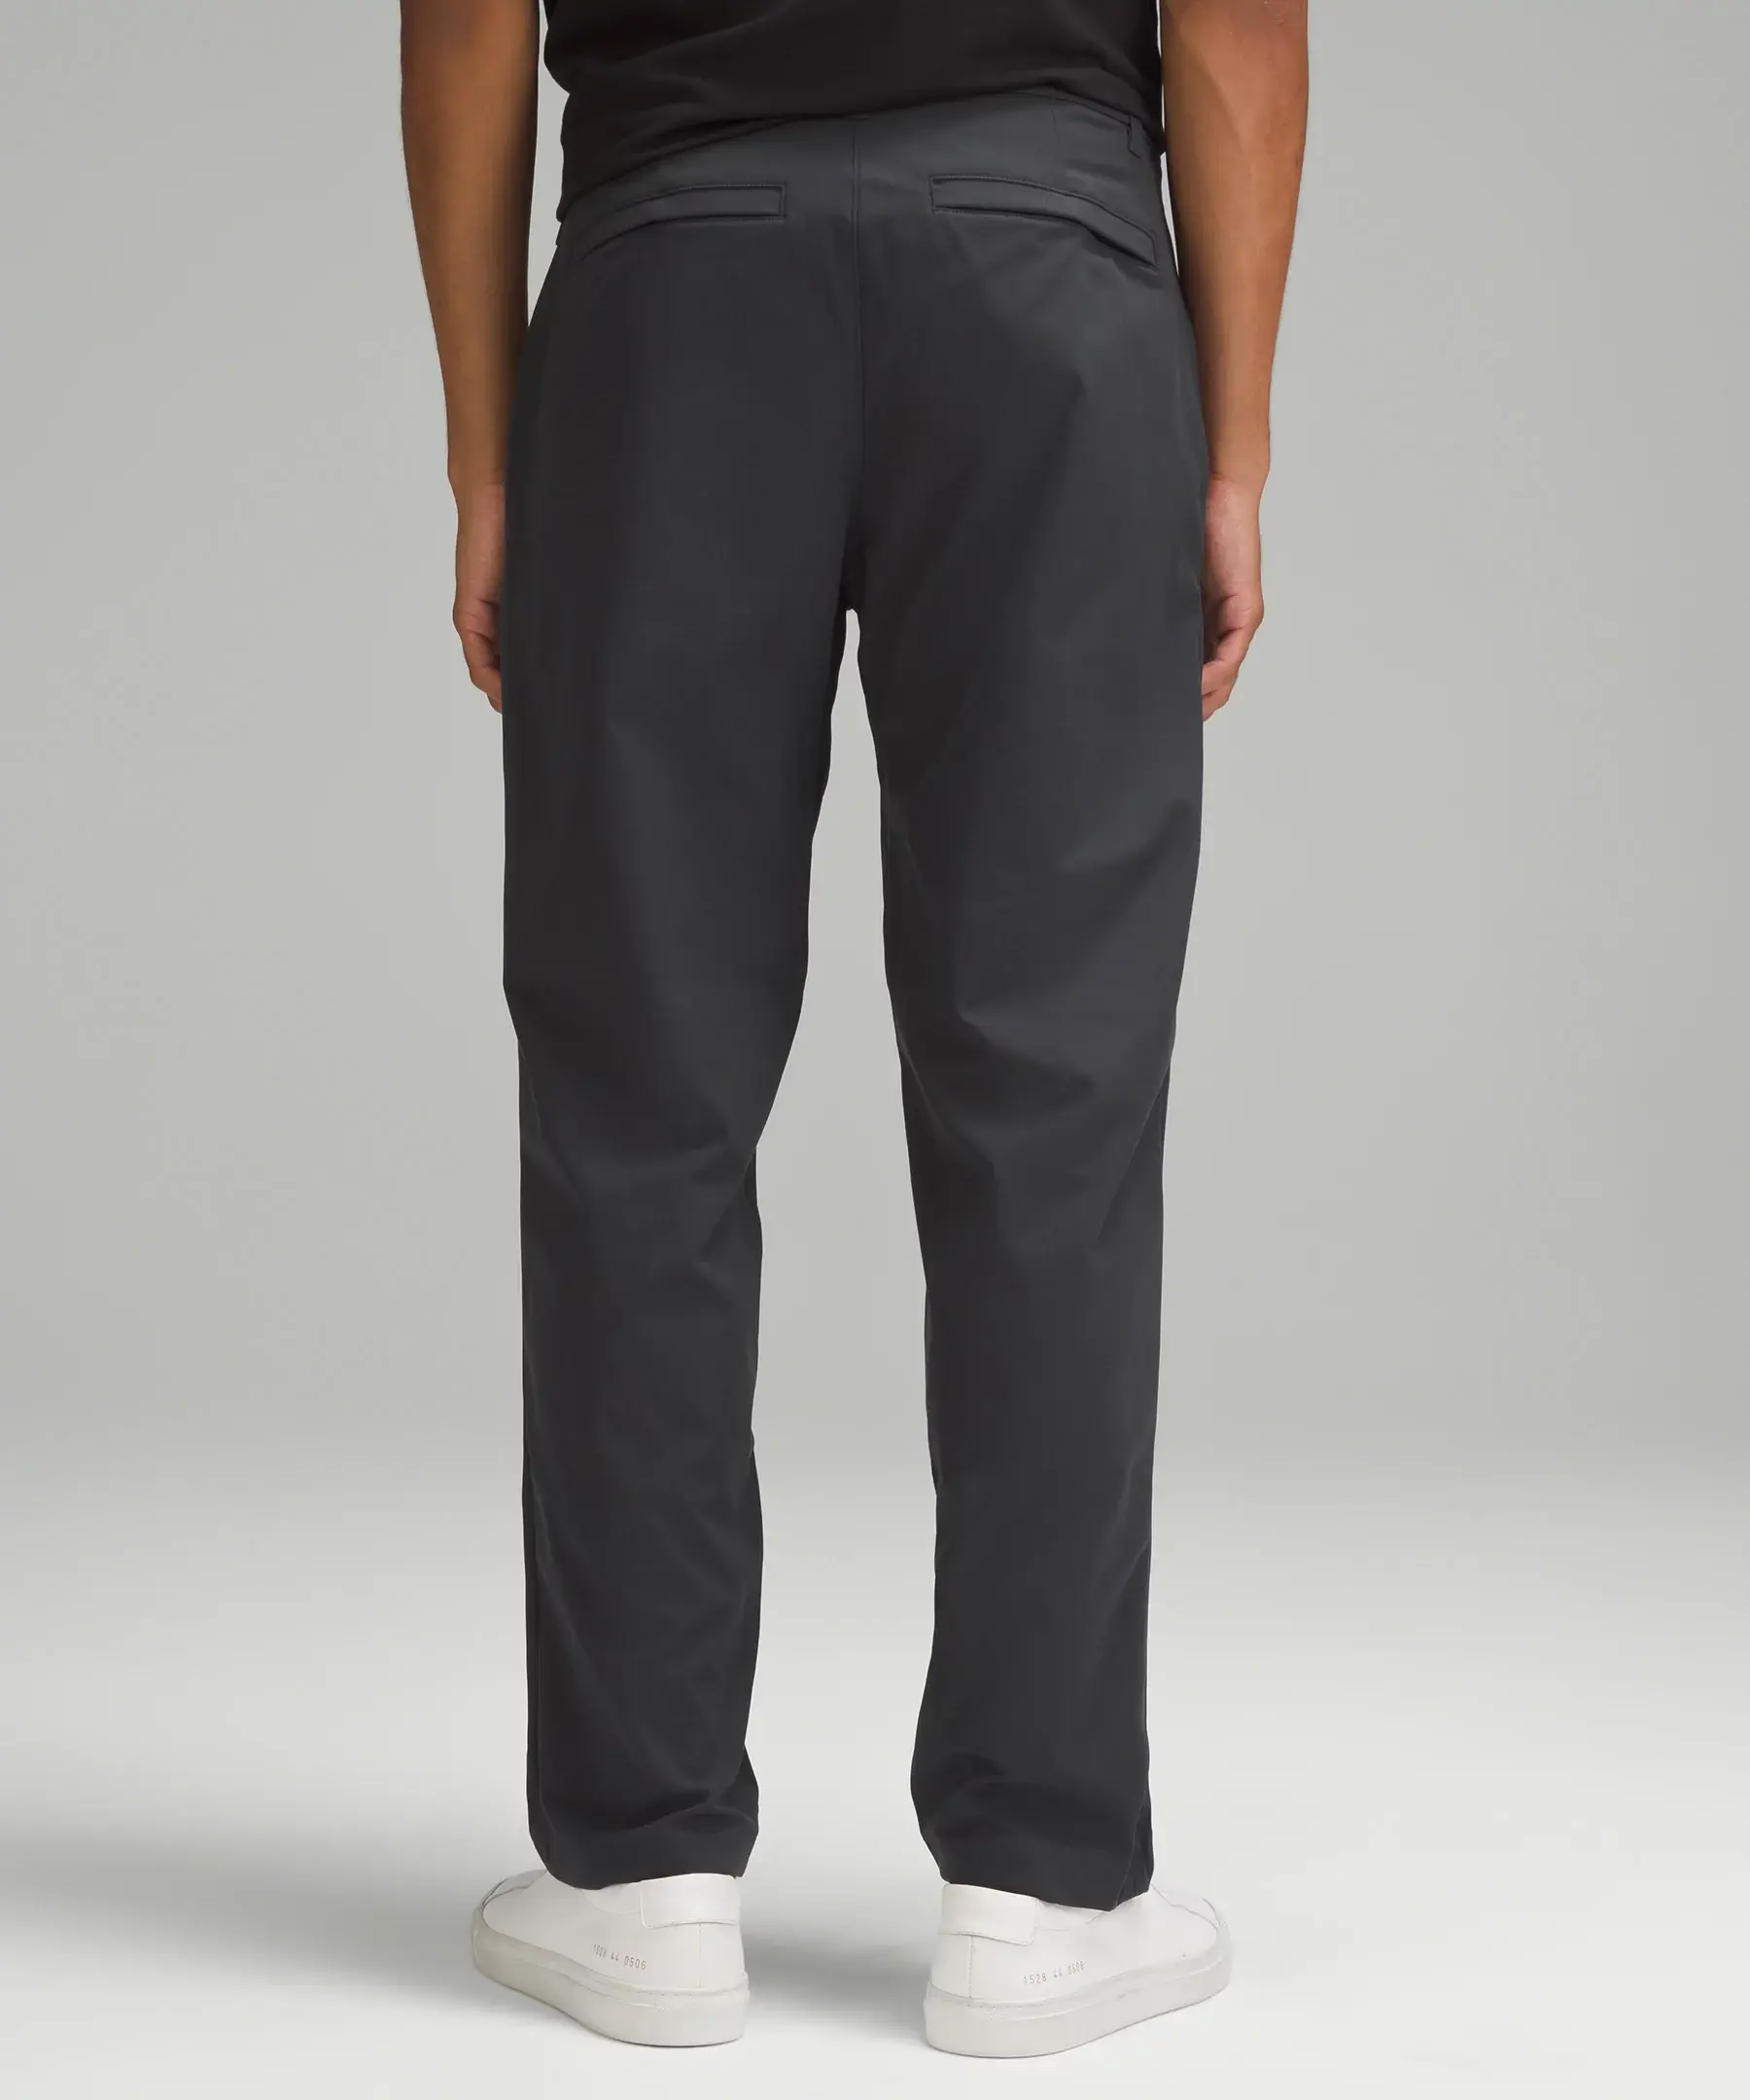 Lululemon ABC Relaxed-Fit Trouser 32" *Warpstreme. 3